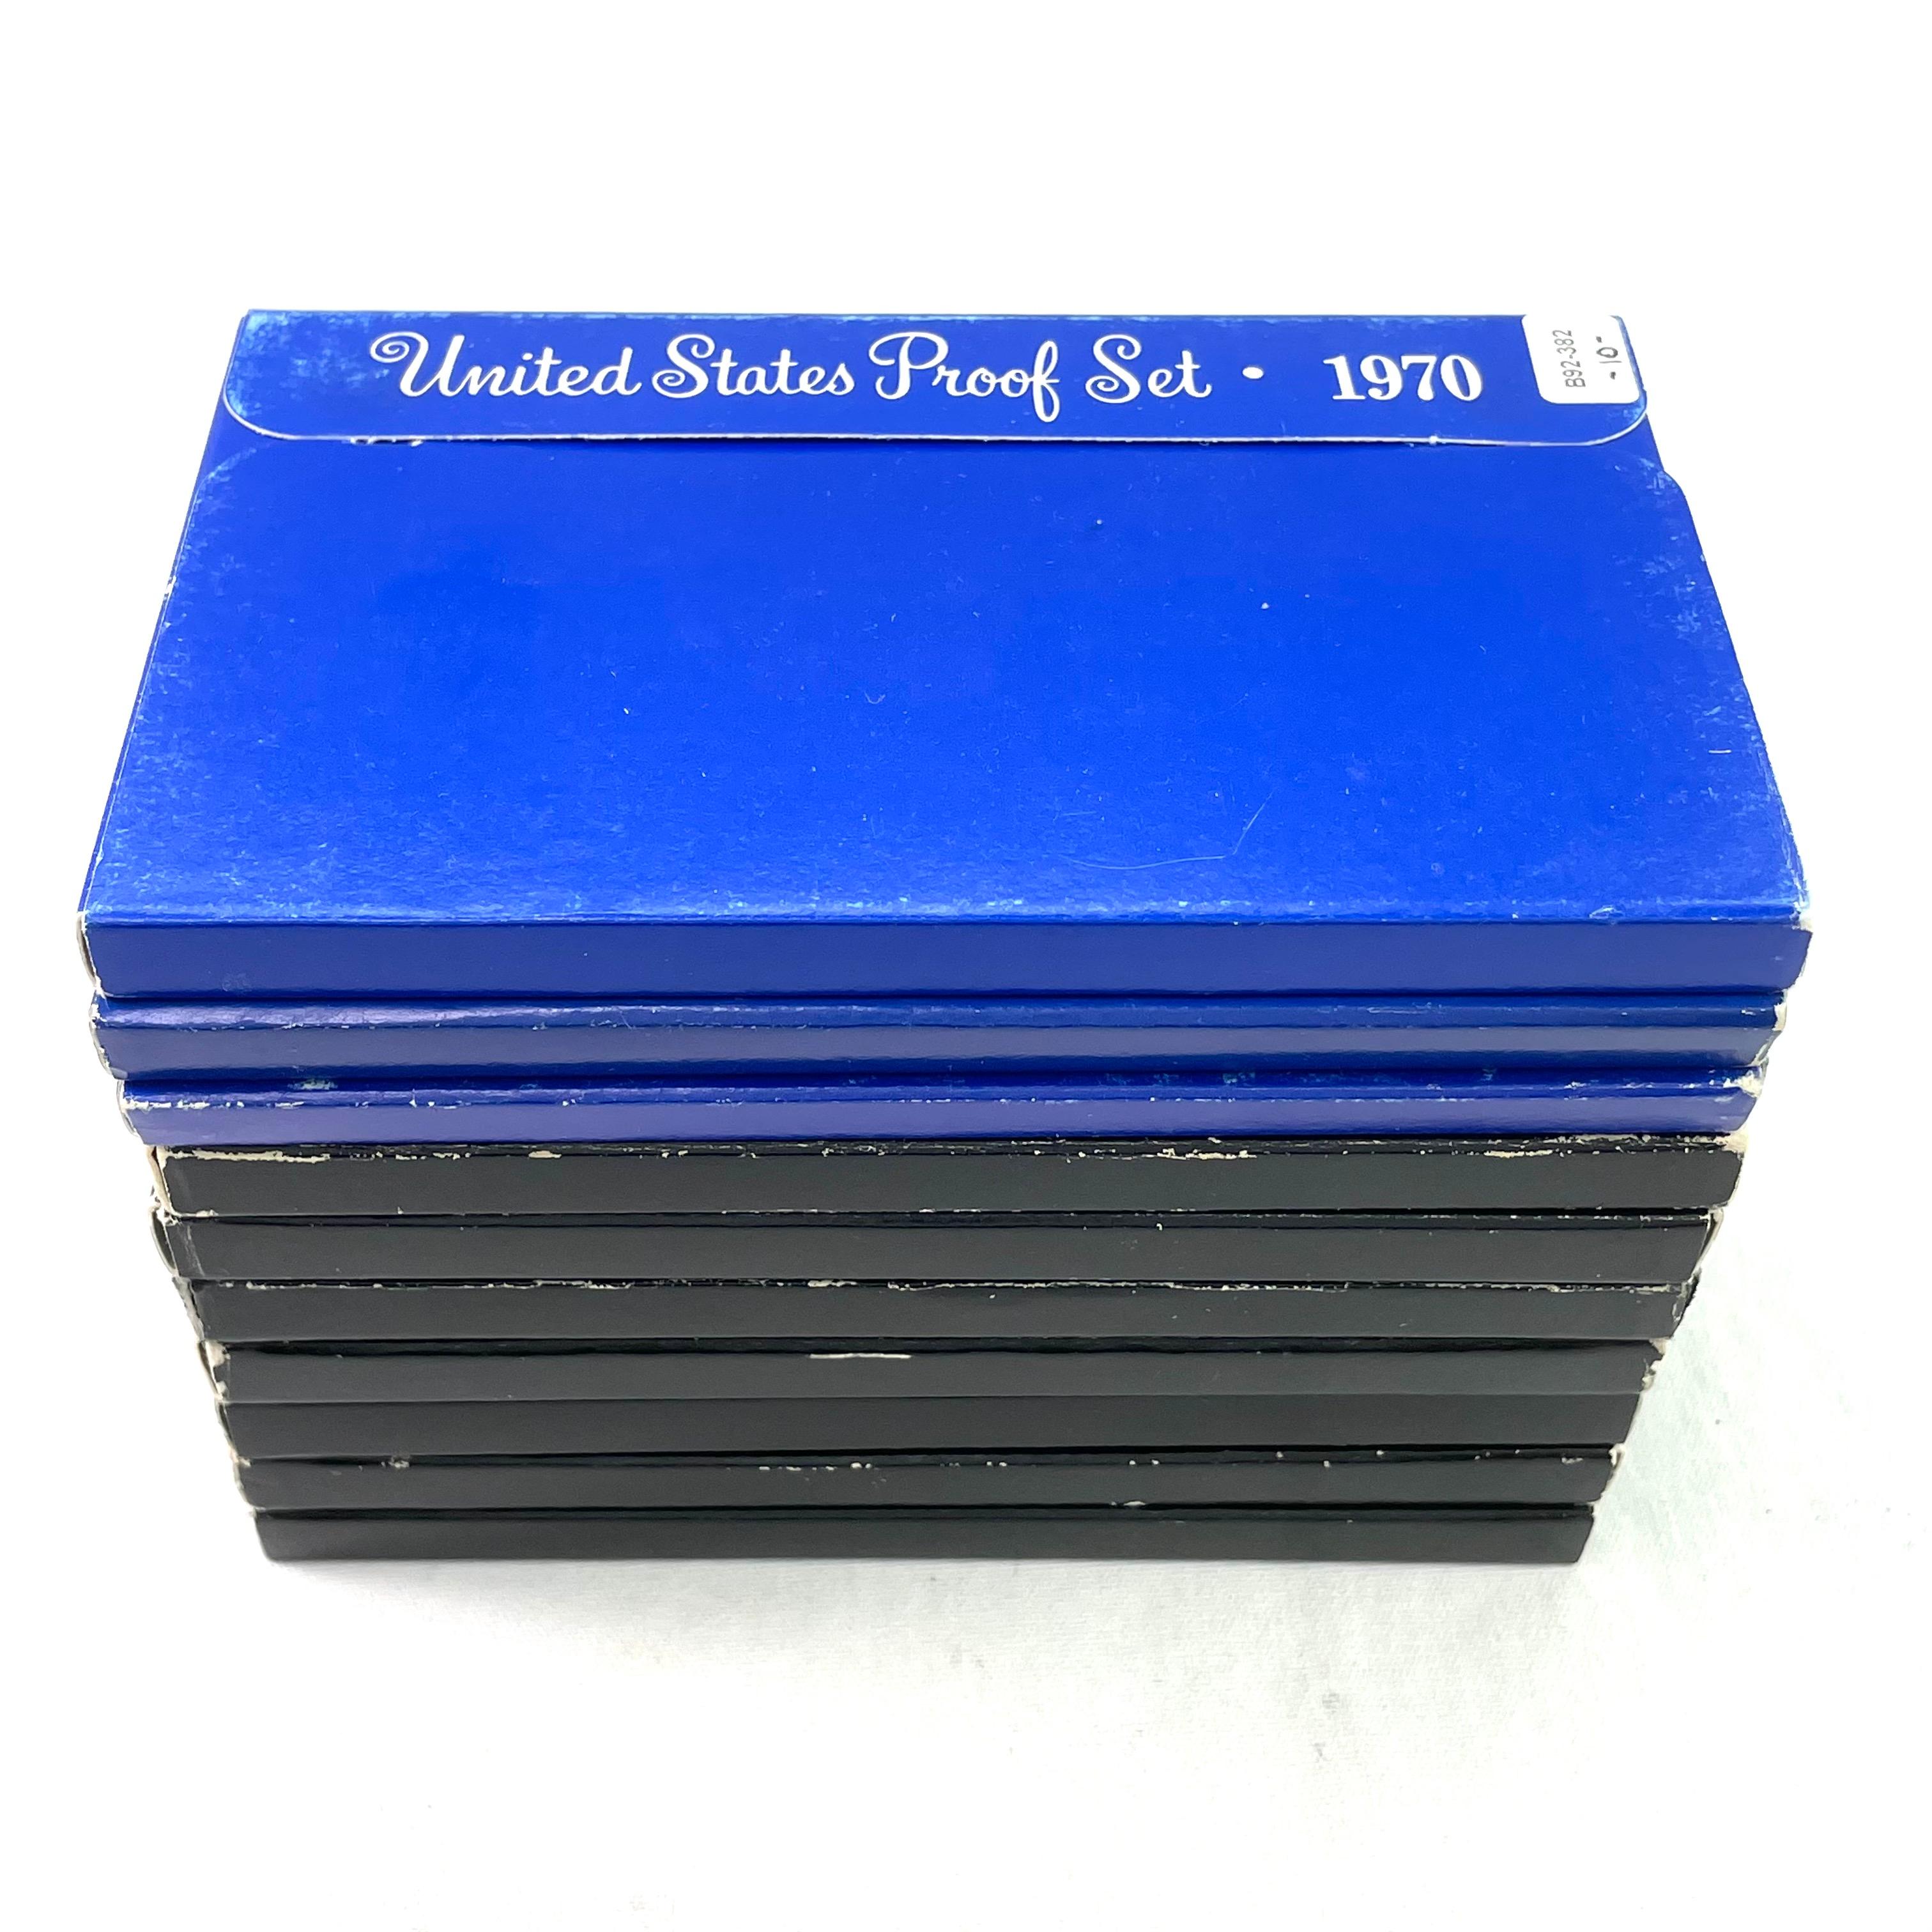 Complete run of all 10 1970s U.S. proof sets